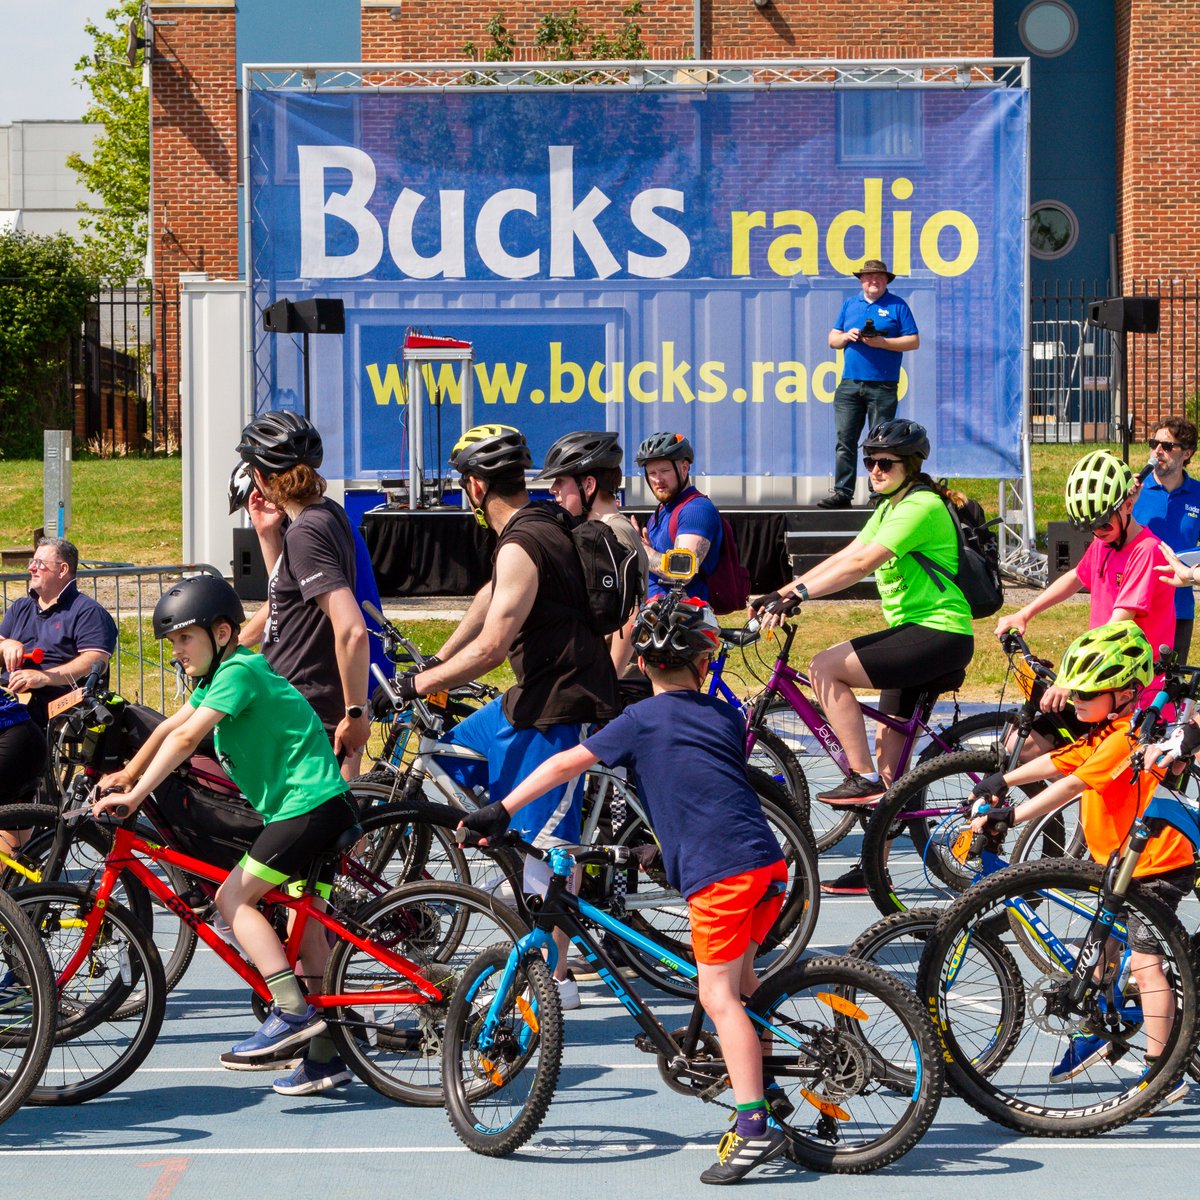 With 2 weeks until the 2024 Tour de Vale we wanted to say a big thank you to our amazing title sponsors @YourBucksRadio for their continued support. Tune in to the station that's at the heart of the community here in Buckinghamshire by visiting bucks.radio #tourdevale